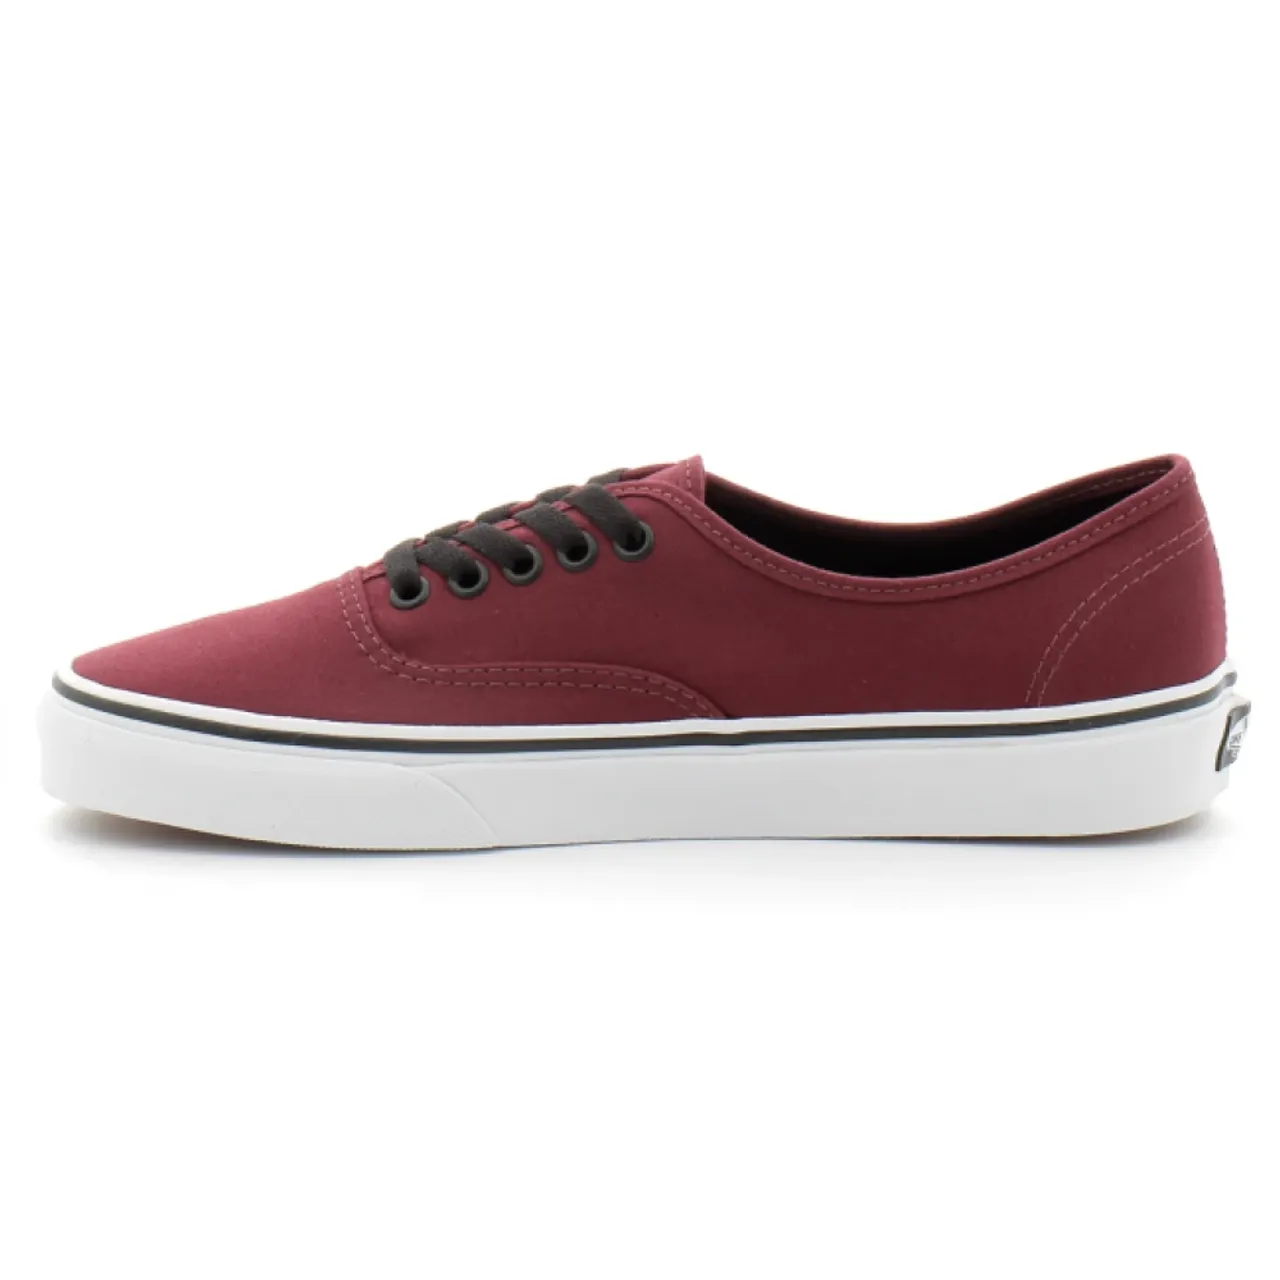 Vans , Authentic Low Lace Canvas Sneakers ,Red male, Sizes: 3 UK, 8 UK, 2 1/2 UK, 1 UK, 10 UK, 7 UK, 9 UK, 10 1/2 UK, 12 UK, 5 UK, 8 1/2 UK, 6 1/2 UK